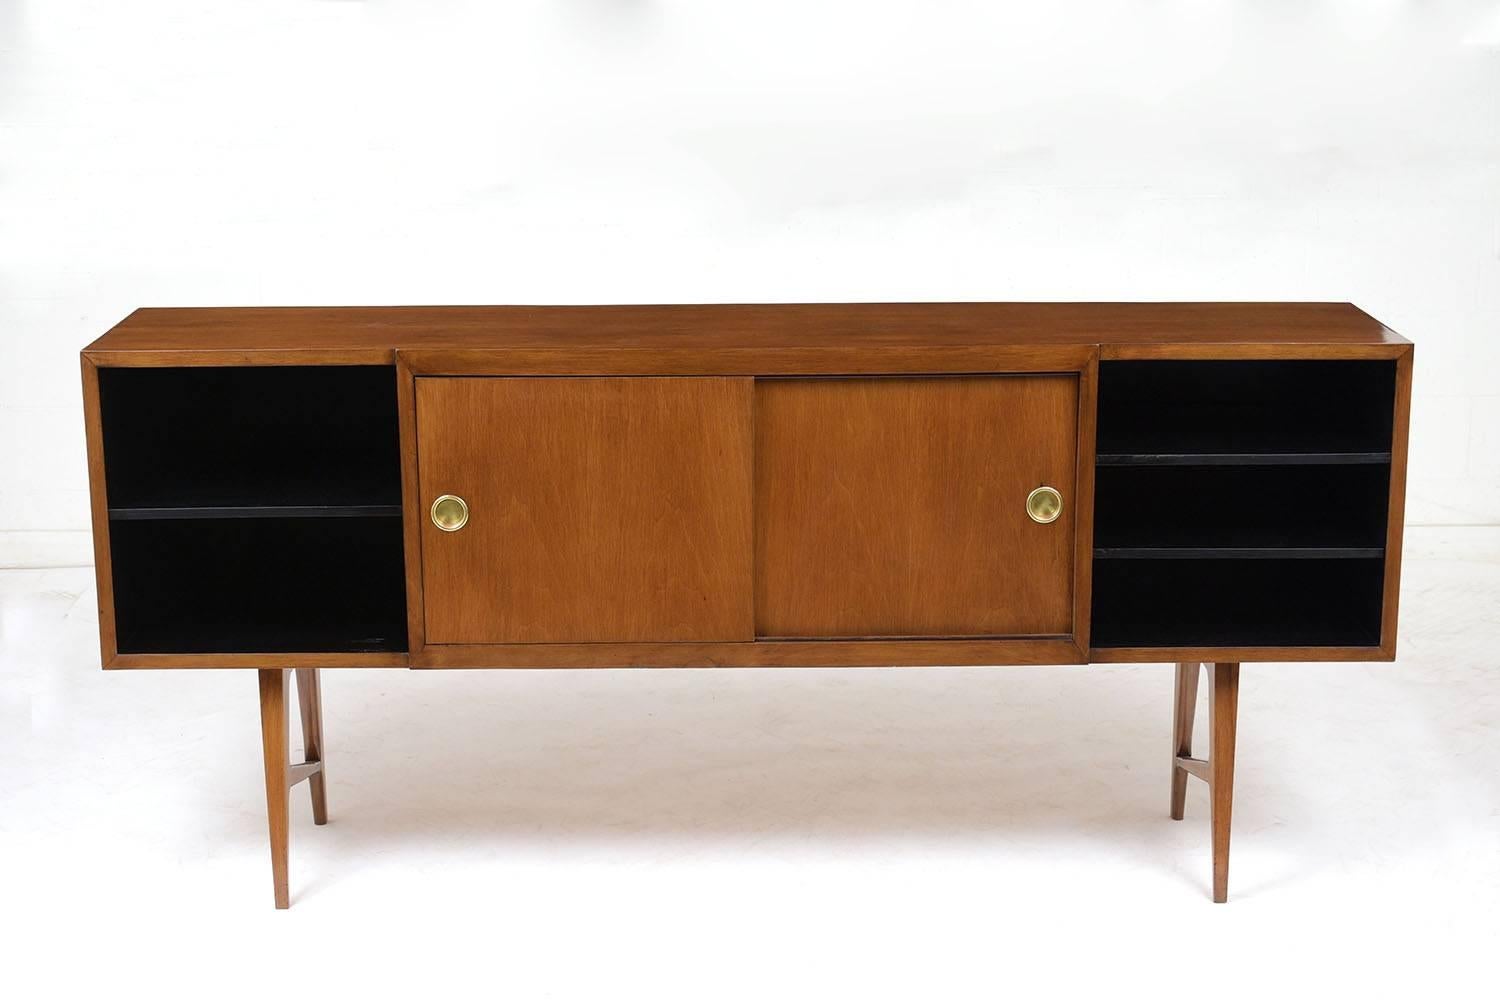 This 1960s Mid-Century Modern credenza is stained in a rich walnut color with a polished finish. The two open sections on the ends are finished in black and have shelves for storage. The centre section has two sliding doors with brass hardware and a